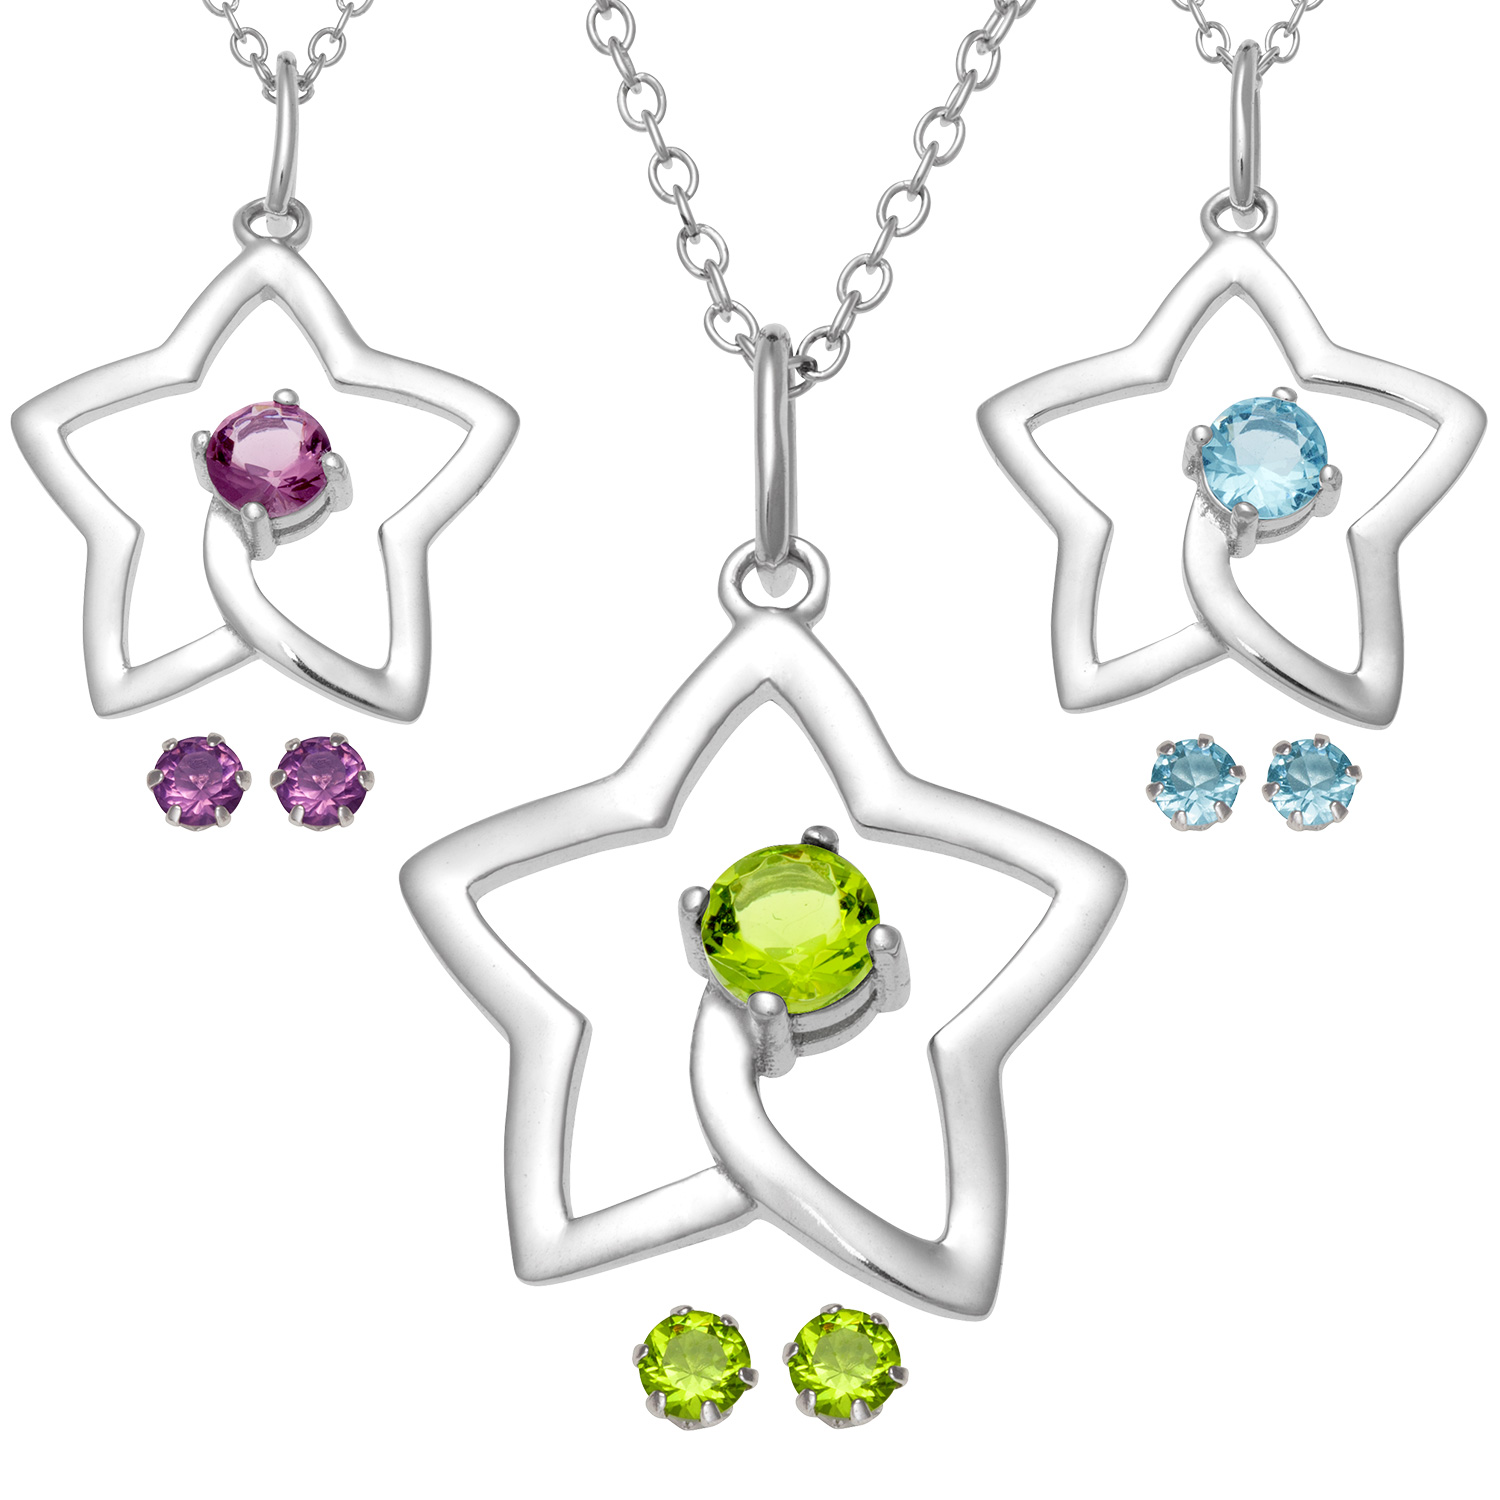 Sterling Silver Star Birthstone Necklace with Matching Earrings